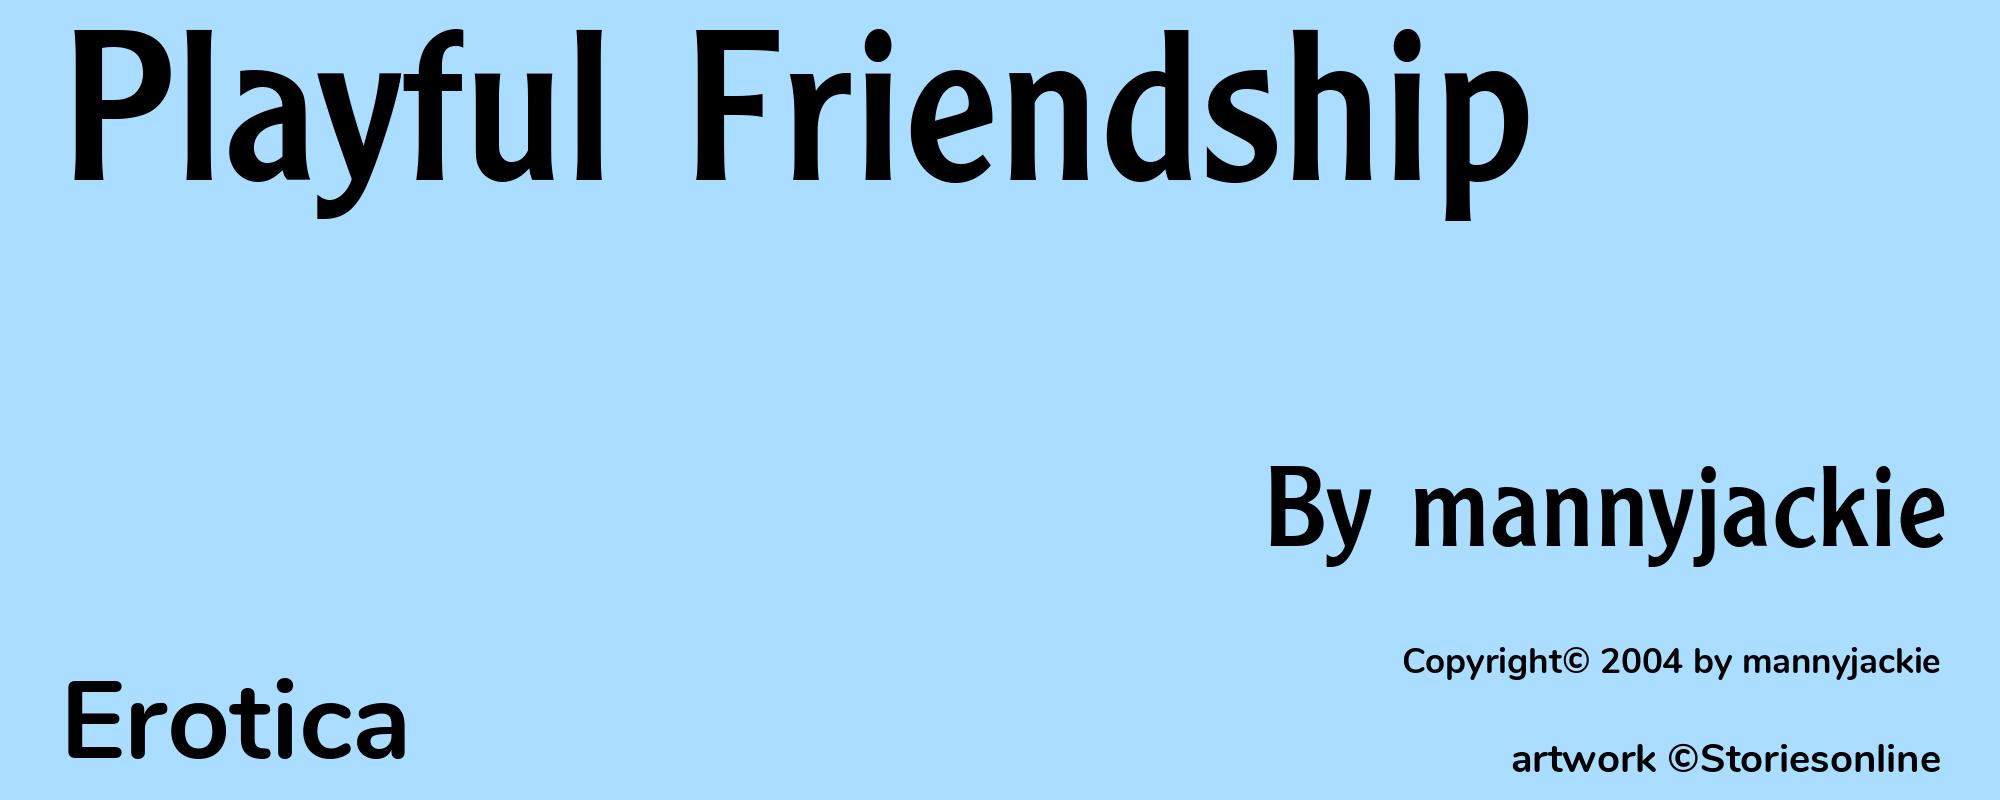 Playful Friendship - Cover